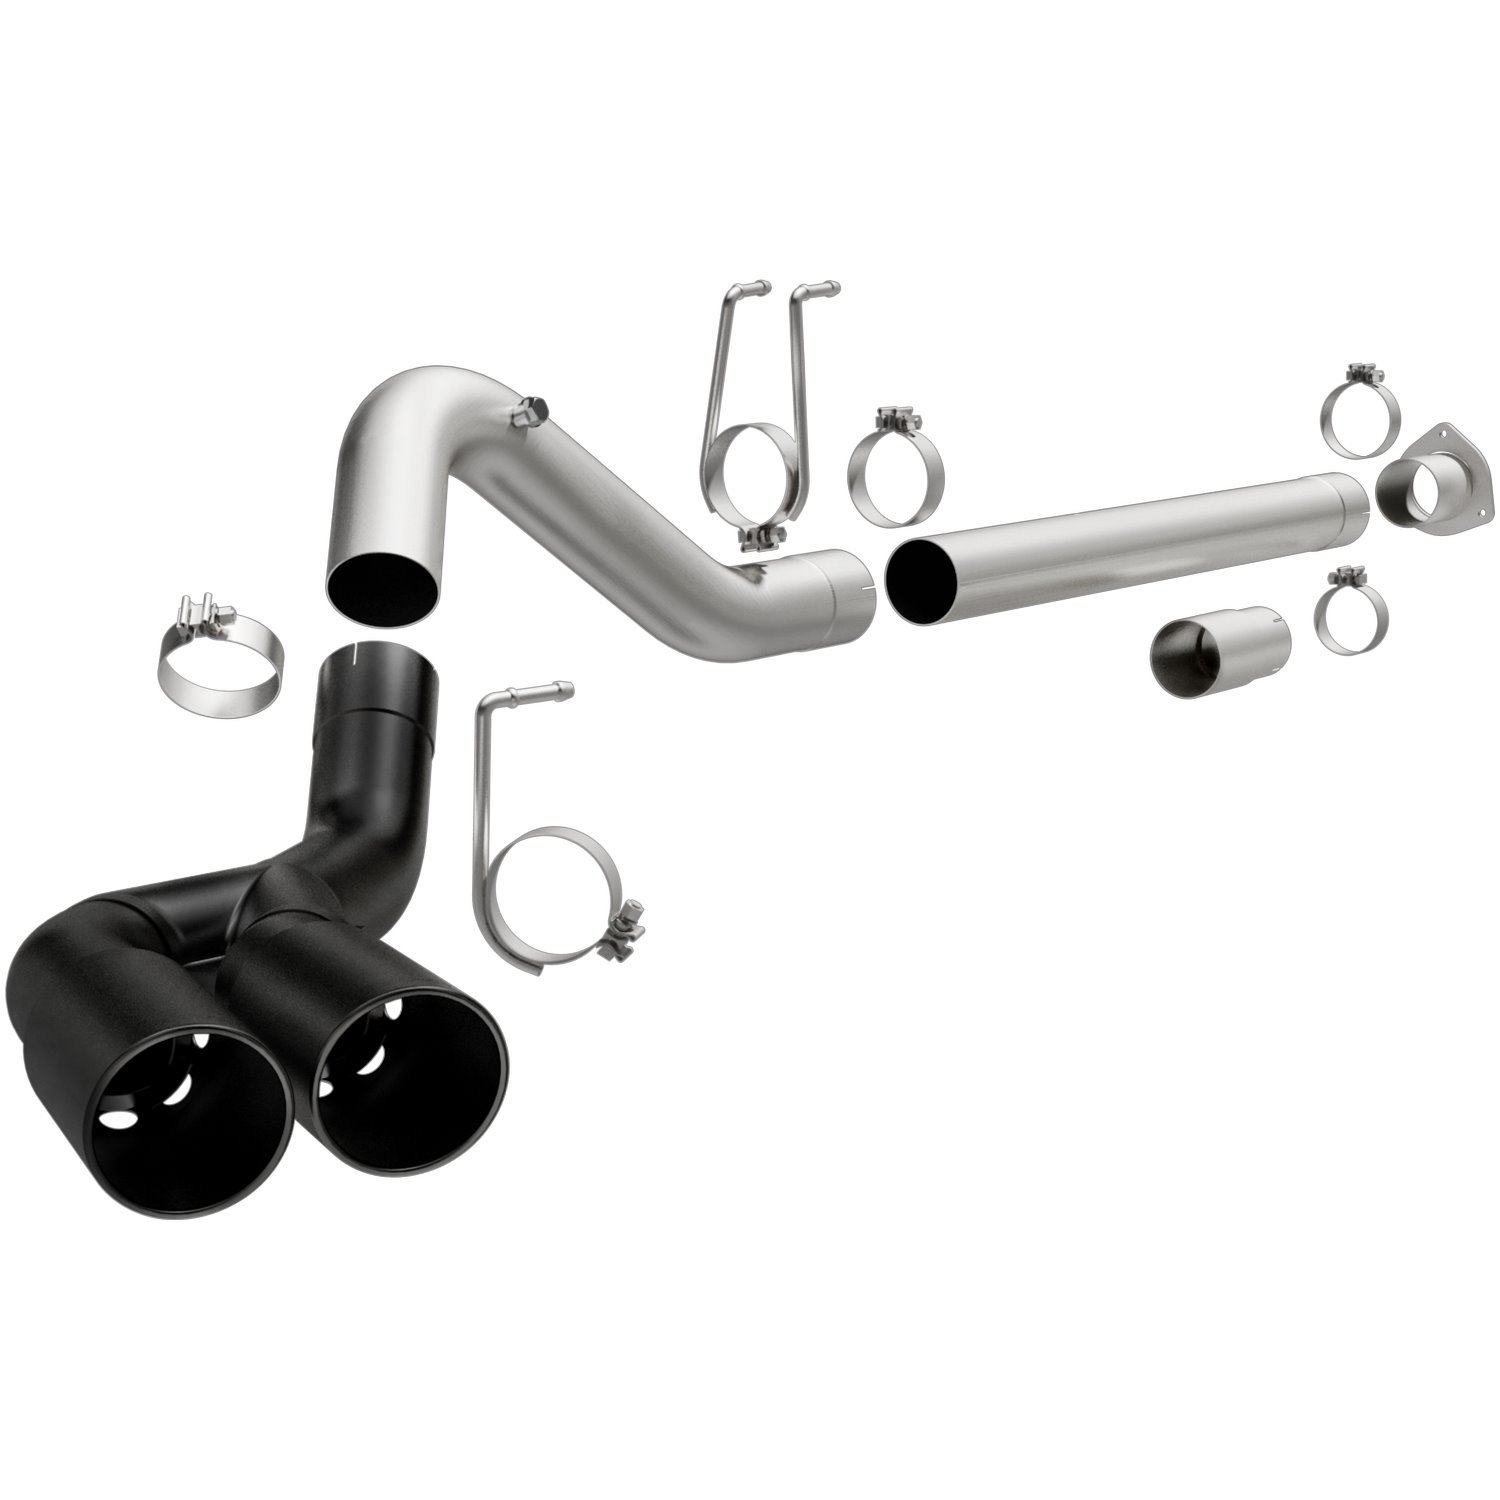 Filter-Back Exhaust System 2008-2019 Ford F-250/F-350/F-450 Super